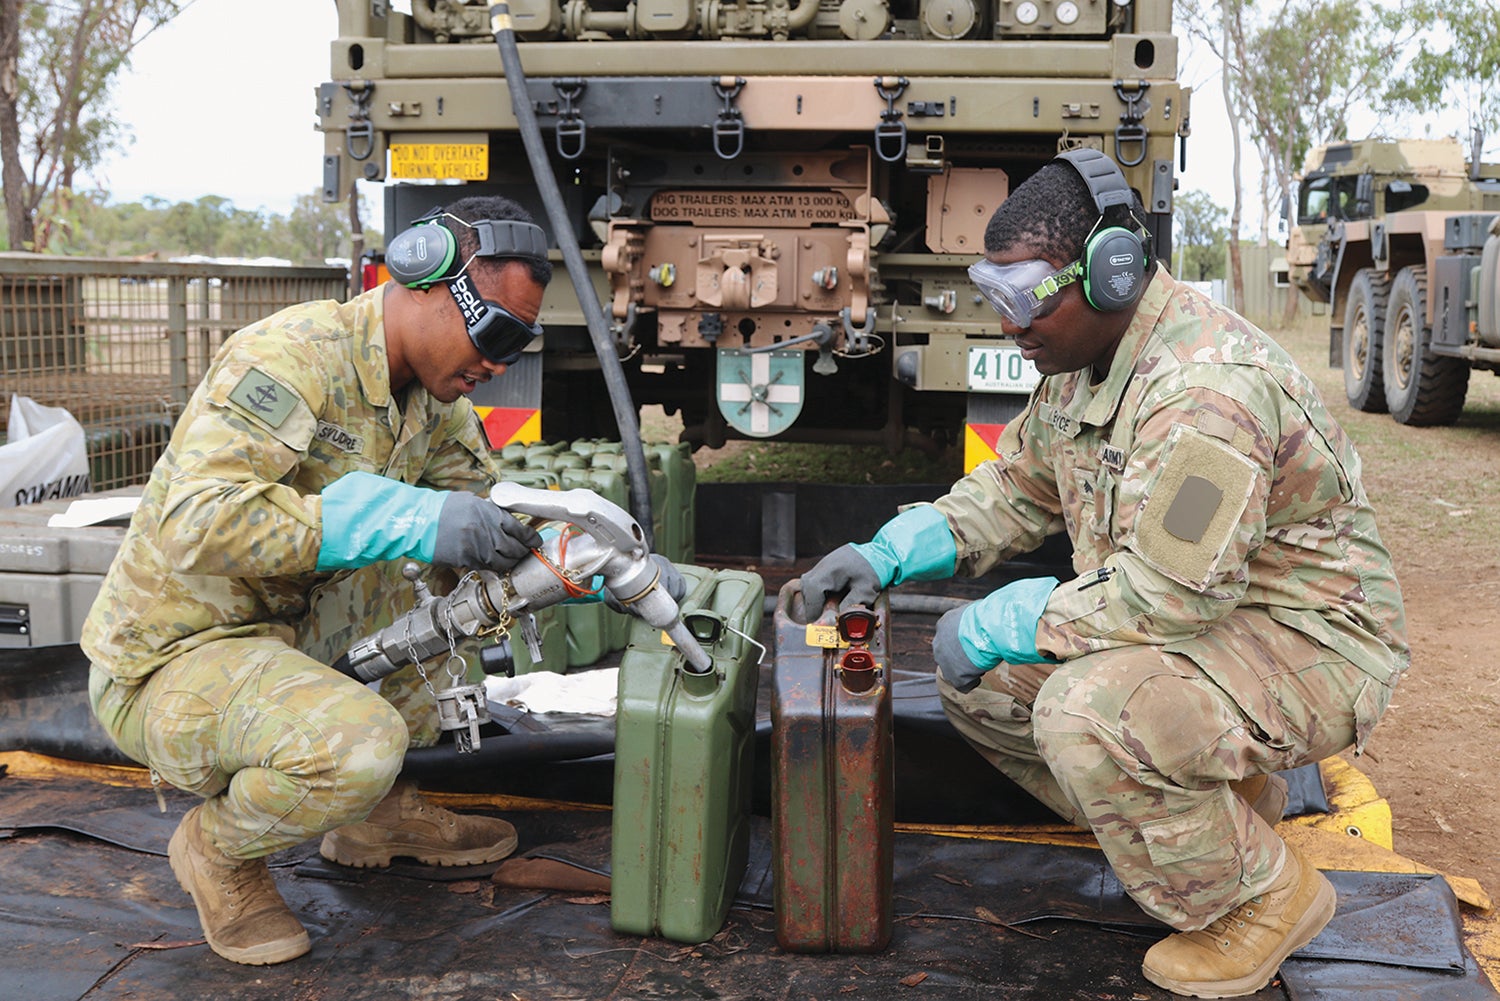 Lance Cpl. Iliesa Sevudredre, left, a truck driver and fueler with the Australian Defence Force, and Sgt. Craig Boyce, a UH-60 Black Hawk helicopter mechanic with the 25th Infantry Division, fill fuel cans in Queensland during Talisman Sabre. (Credit: U.S. Army/Spc. Richard Carlisi)